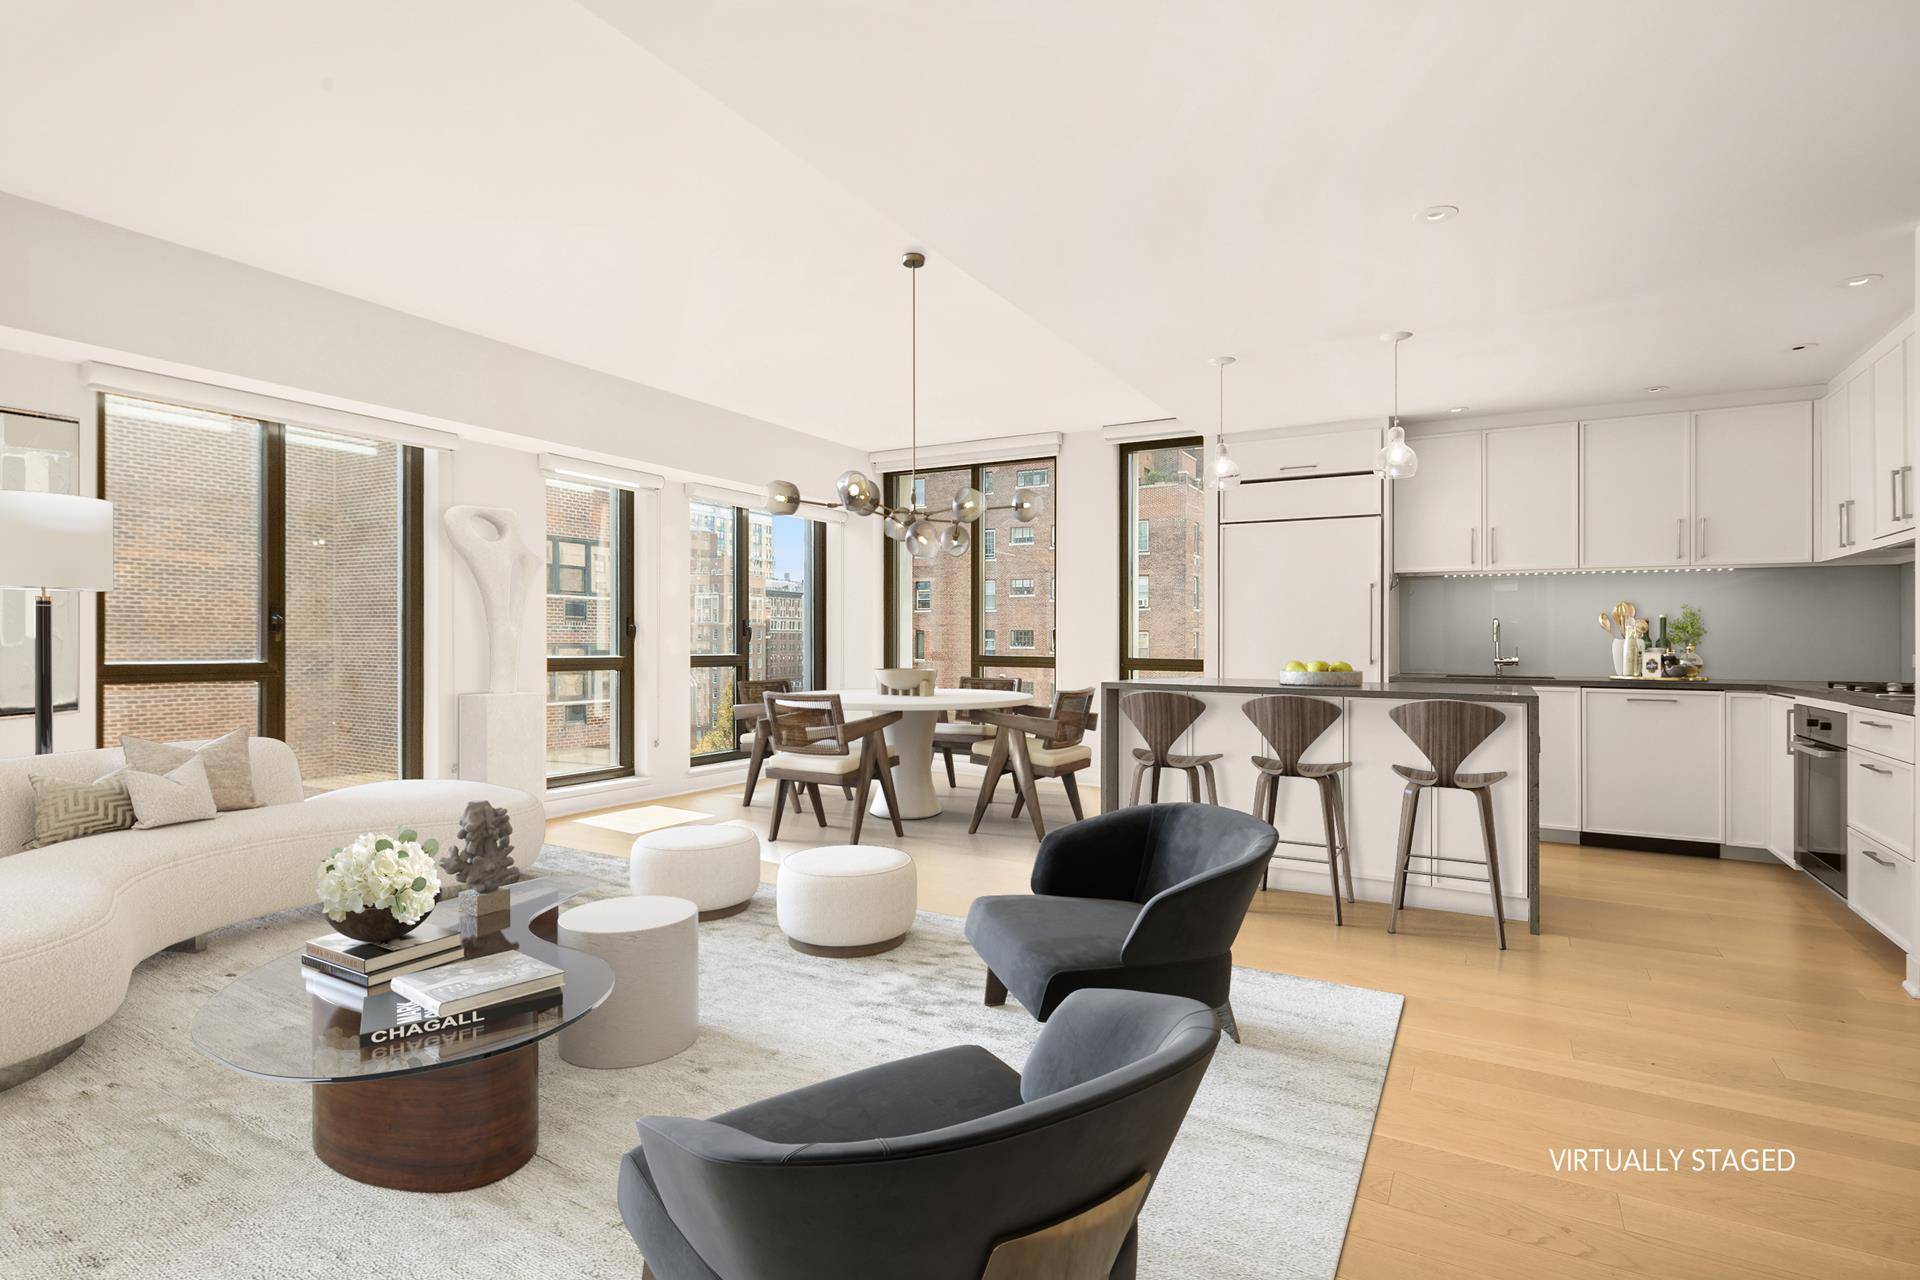 An abundance of light and a well proportioned layout combine to make this exquisite 3 bedroom home in Gramercy Park.